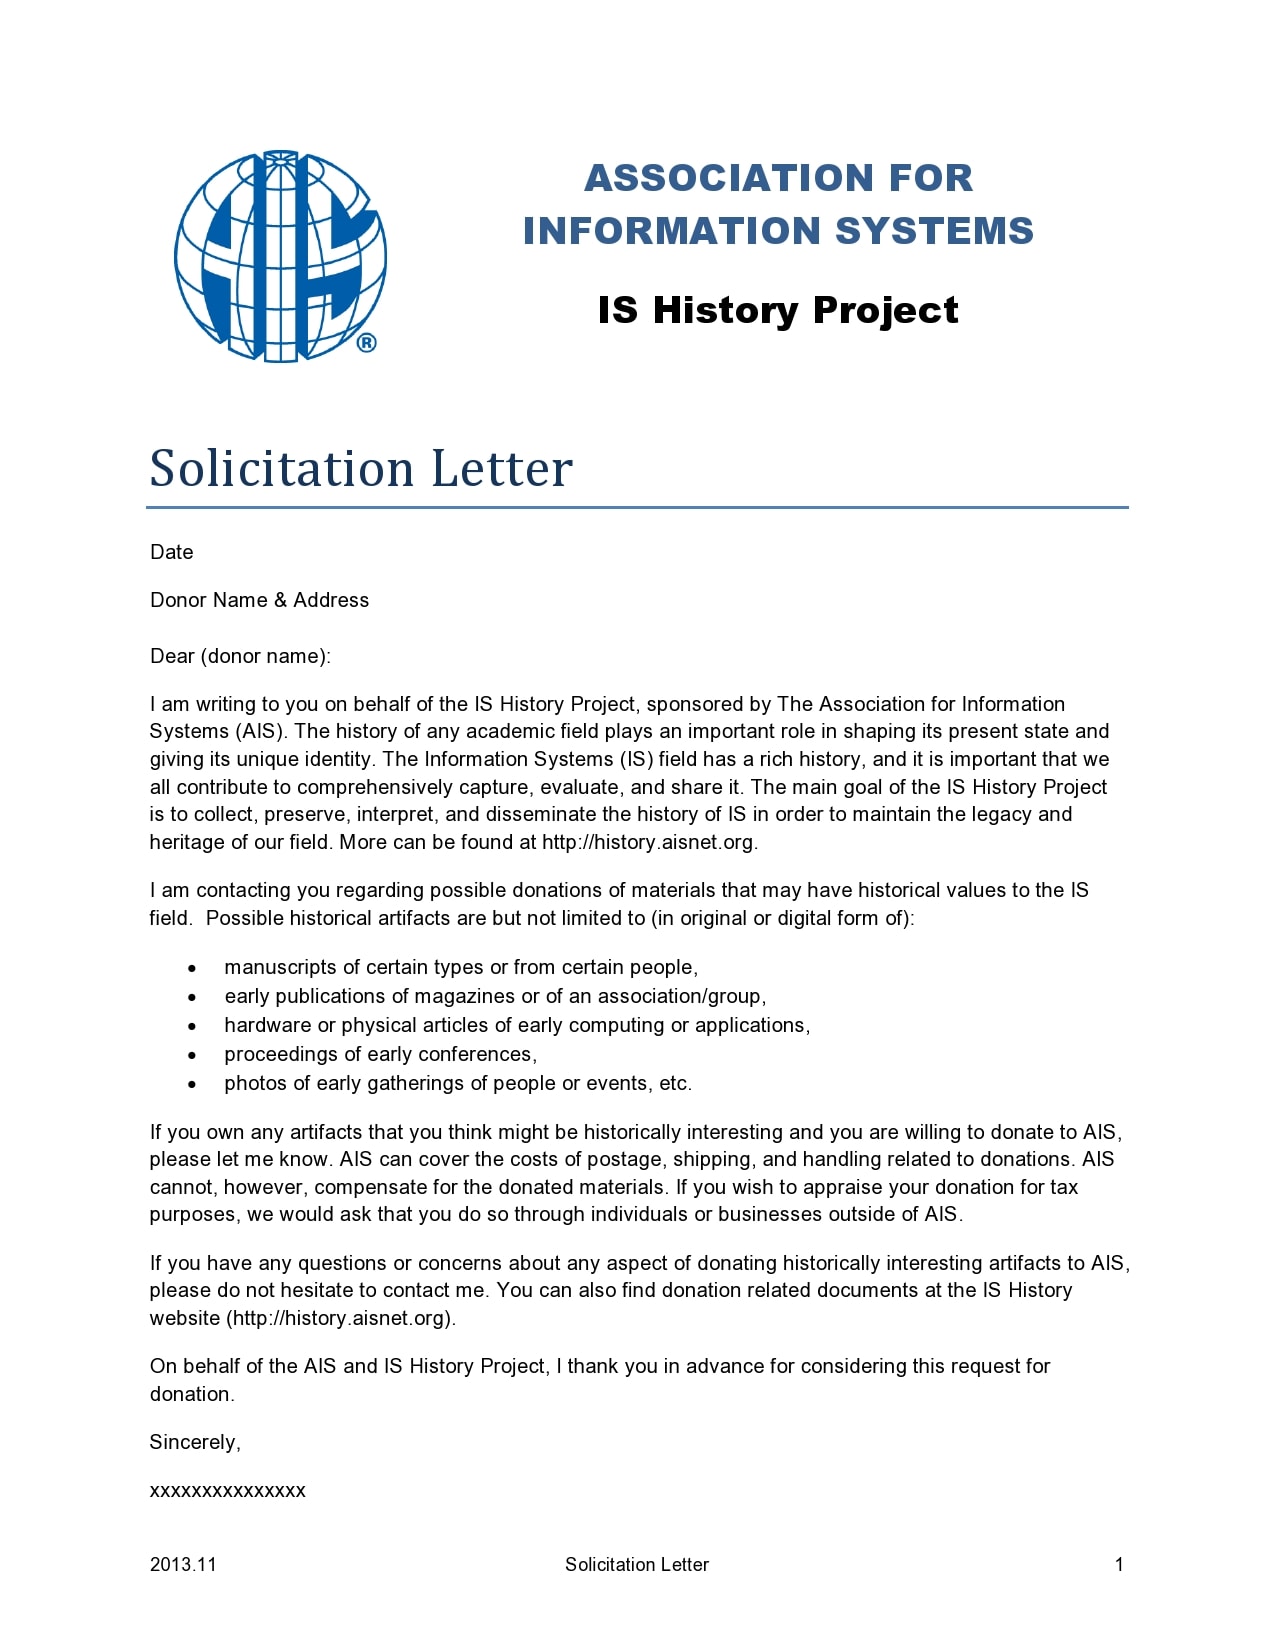 Sample letter of request for materials needed - Formal letter samples and  templates